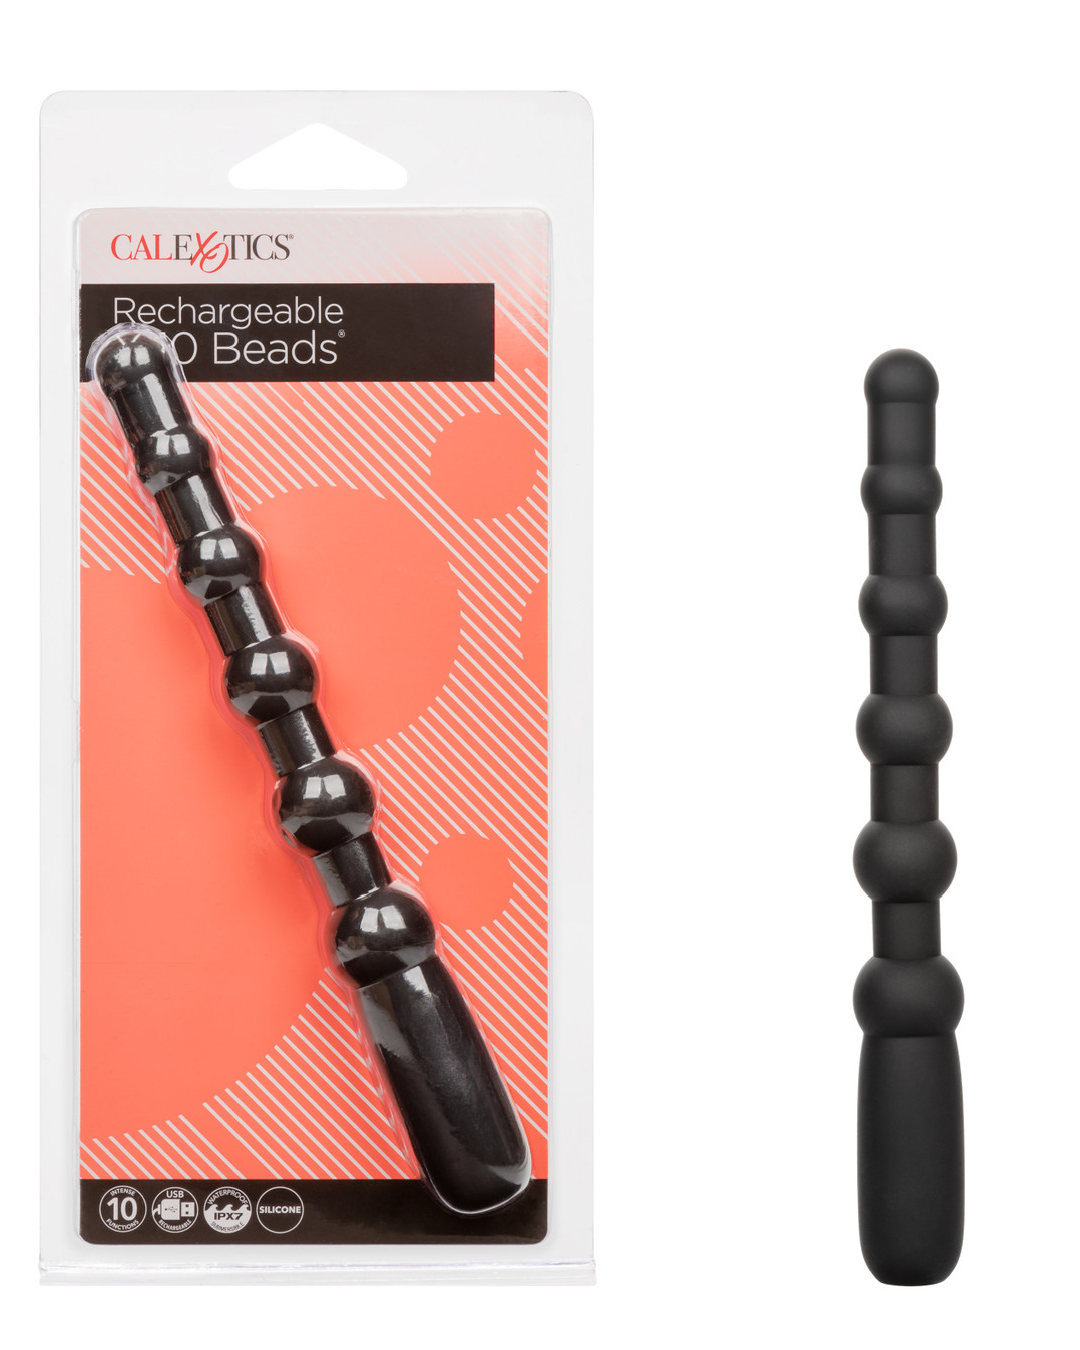 Rechargeable X-10 Powerful Black Silicone Vibrating Anal Beads next to package 